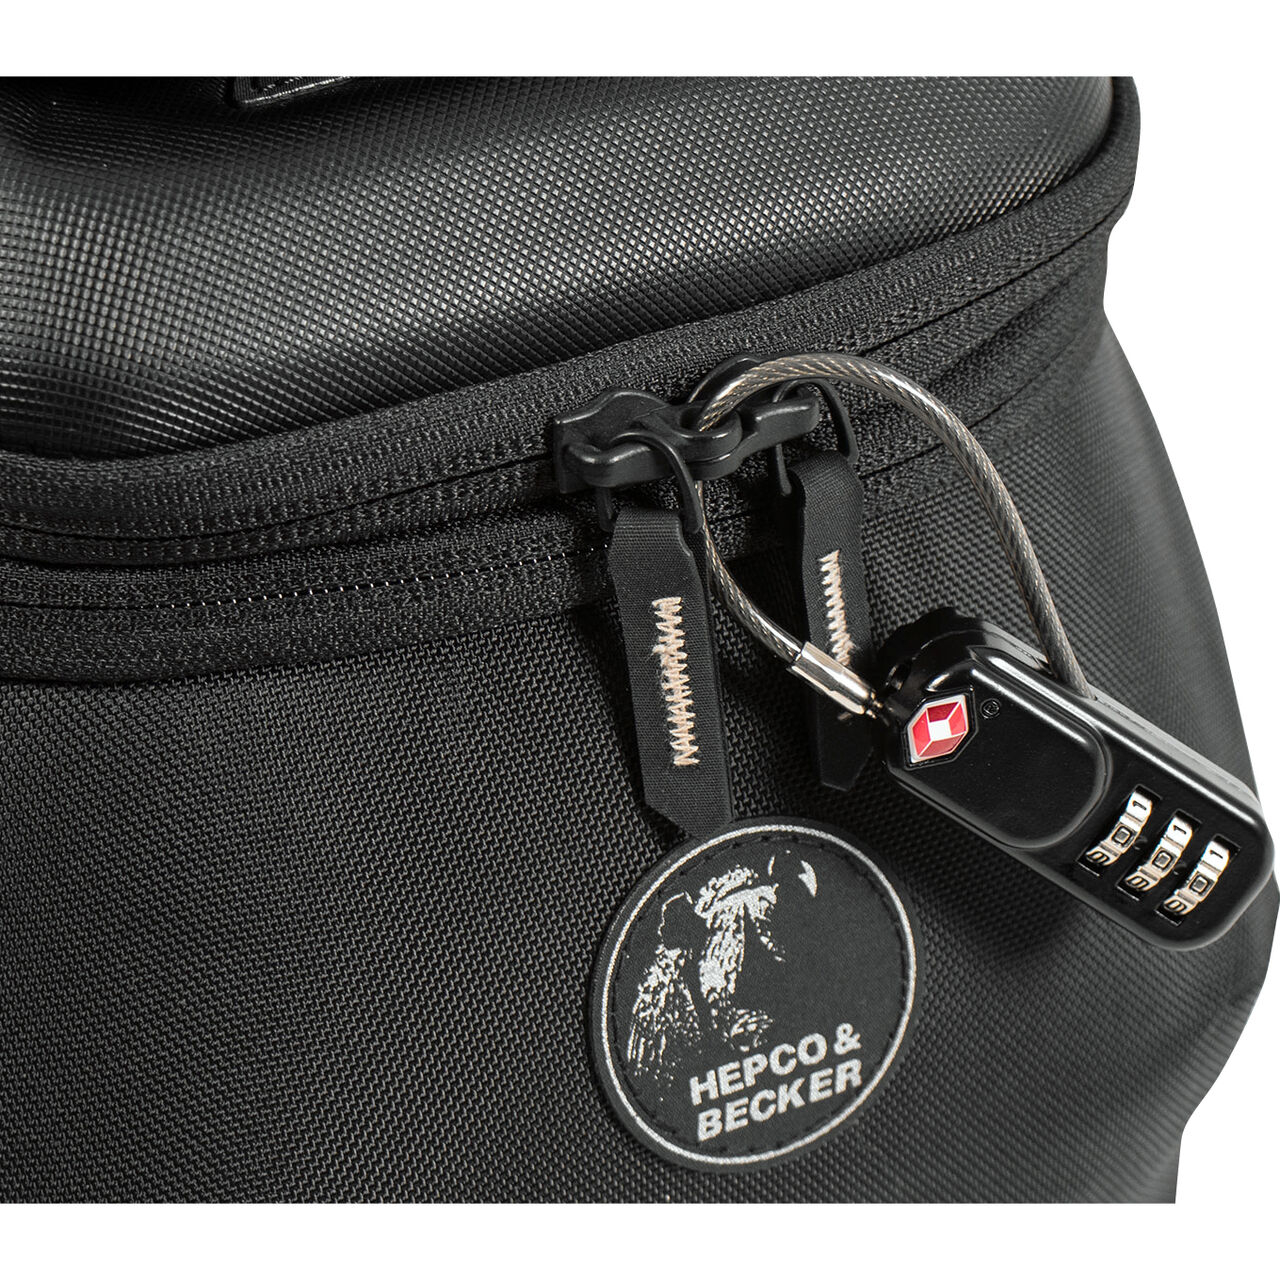 Hepco & Becker Anti-theft device for Lock it tank bags/tail - POLO Motorrad